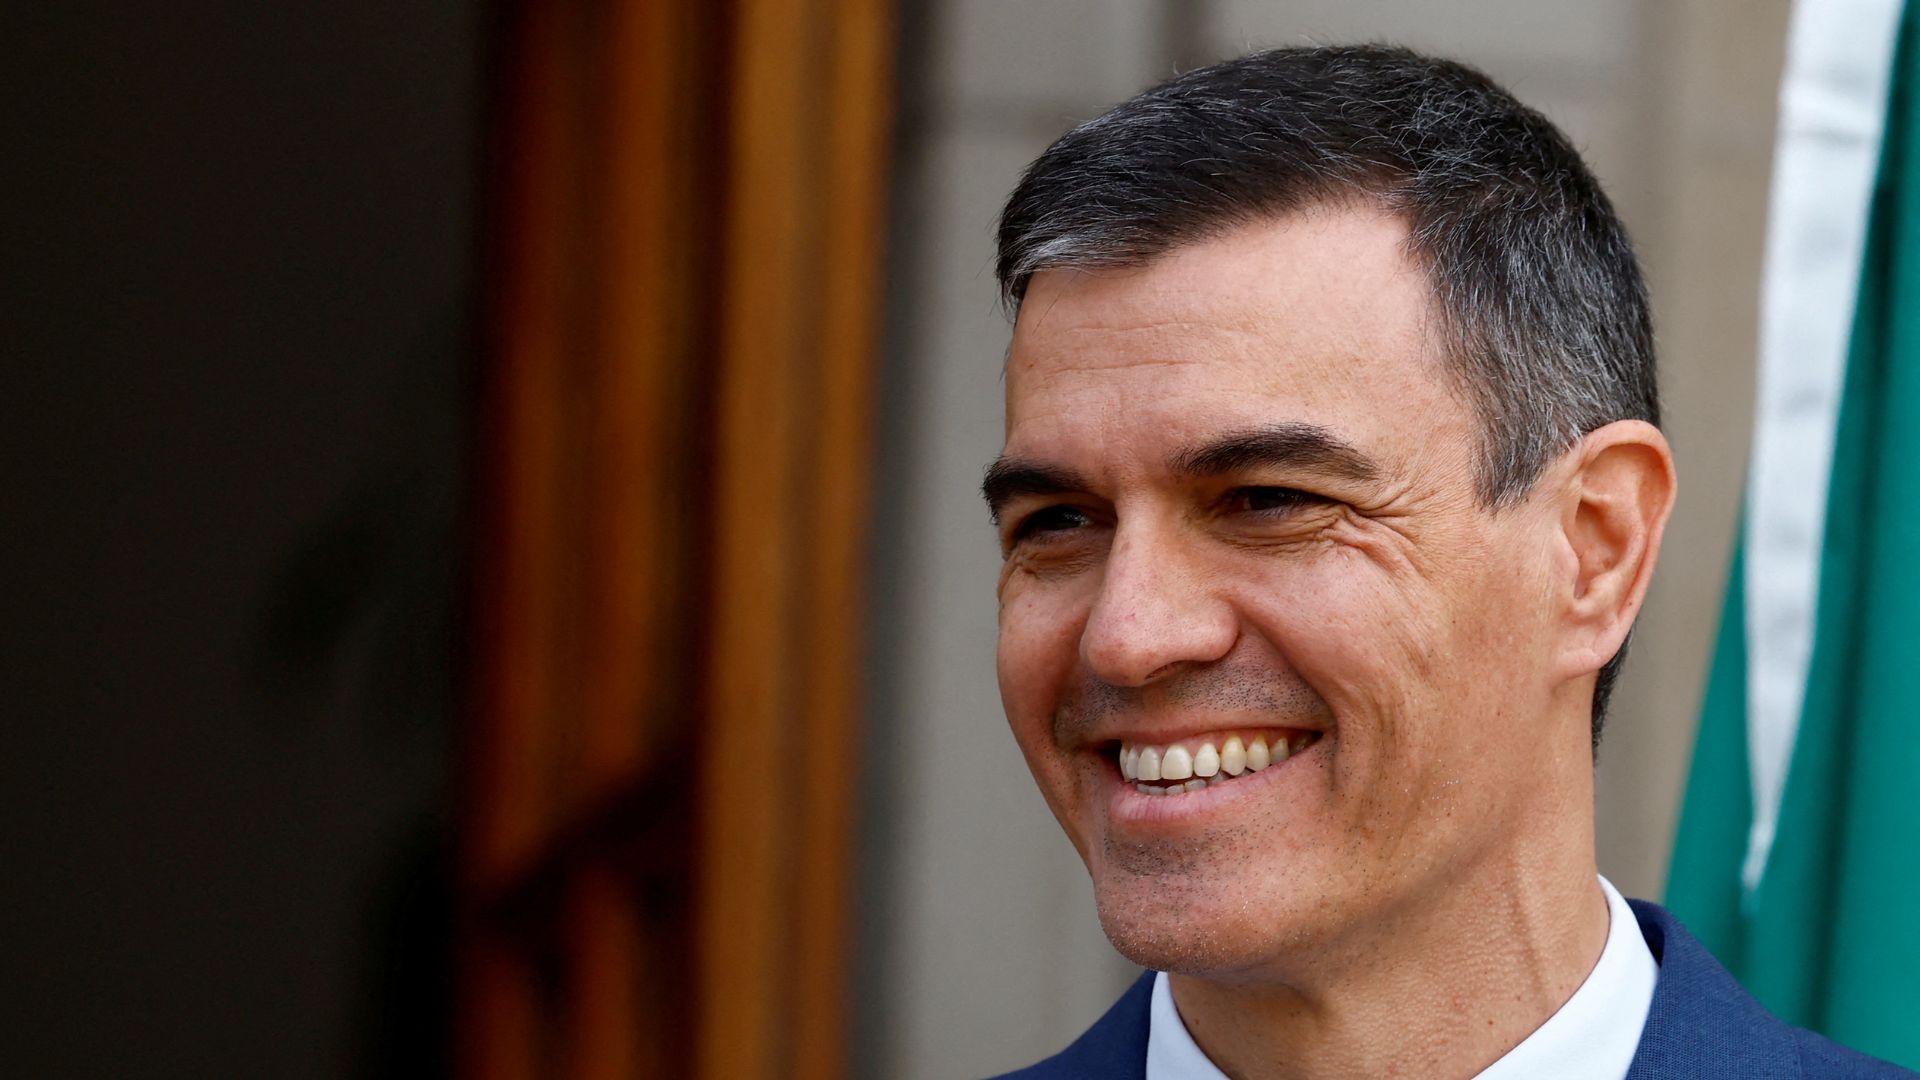 Sanchez staying as Spanish prime minister after days of speculation